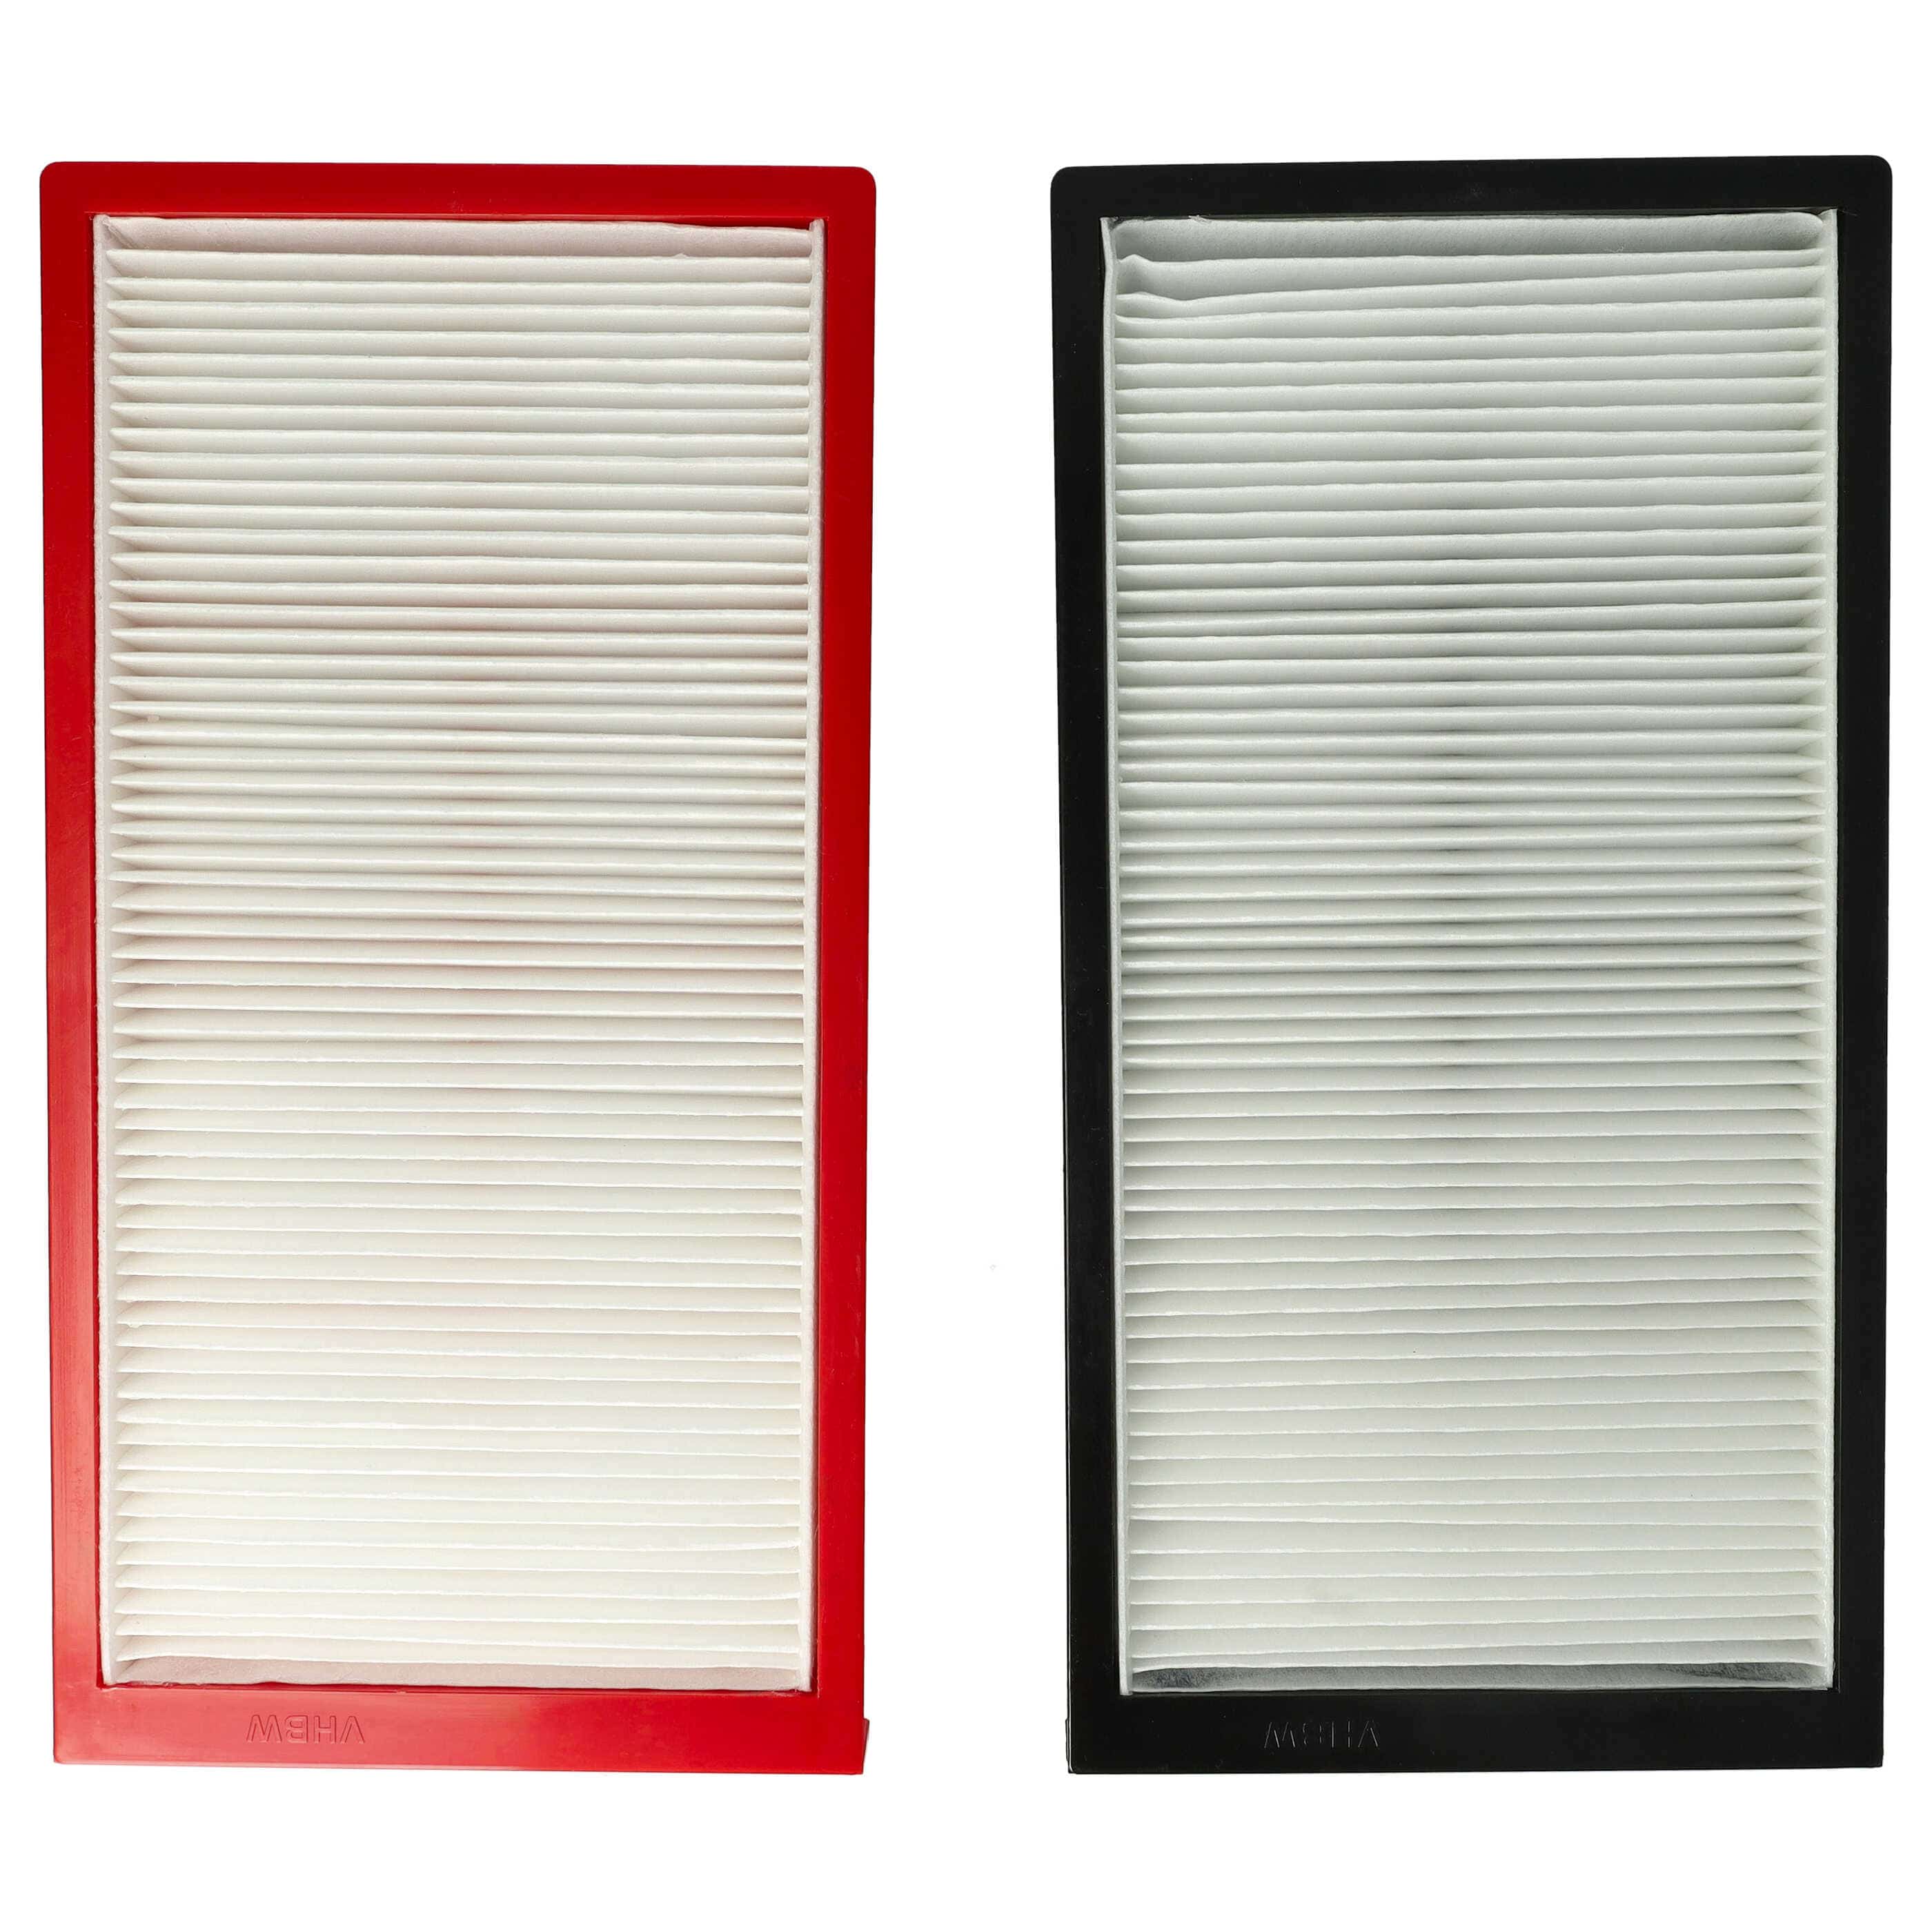 Air Filter Set Replacement for Wernig EFS G 90-200 GF for Ventilation Devices - G4 / F7 2-Part Kit